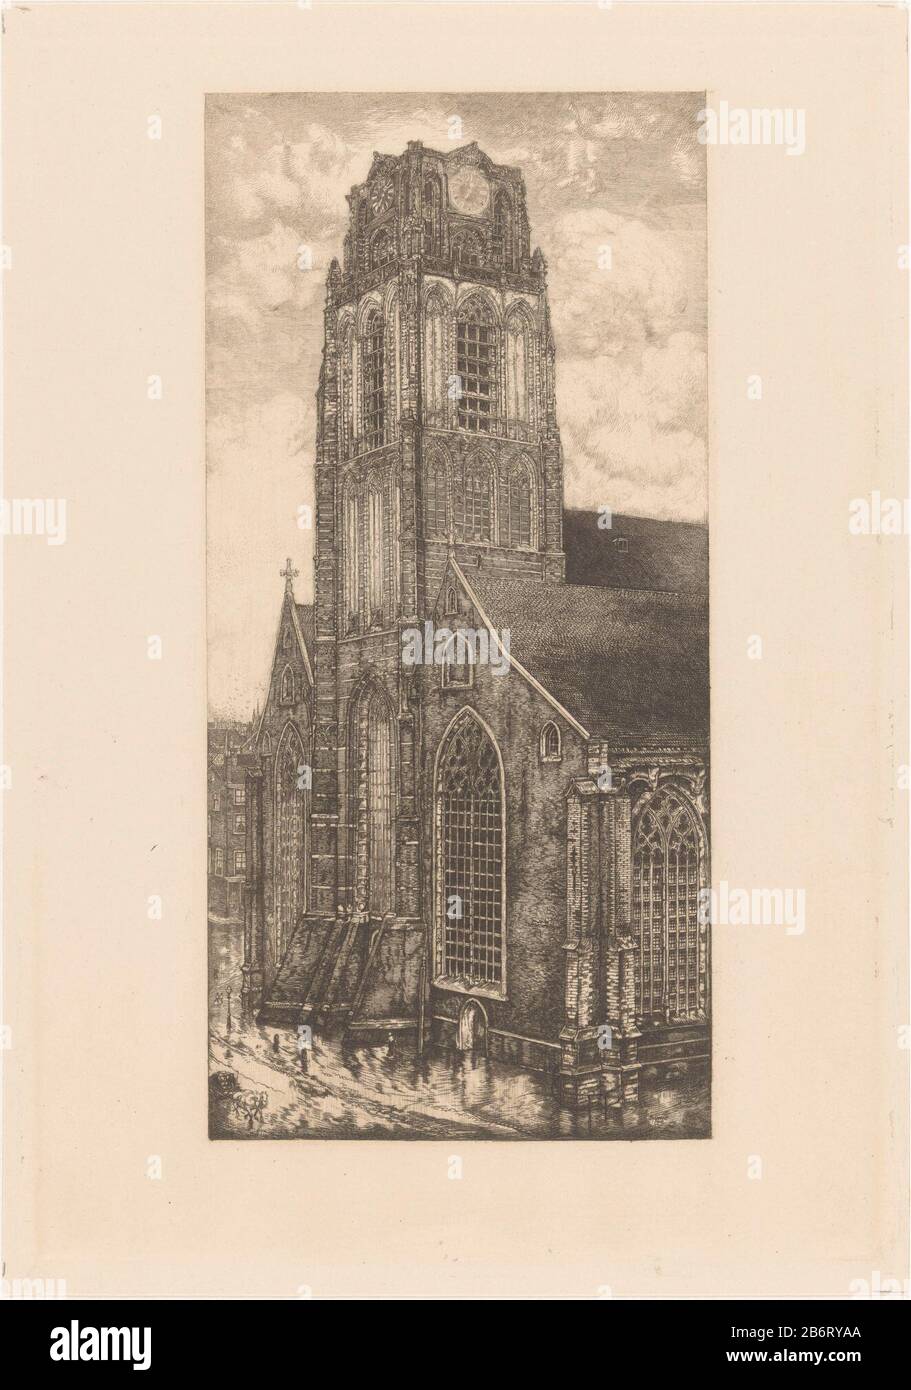 Grote Of Sint Laurenskerk In Rotterdam Grote Of Sint Laurenskerk In Rotterdam Property Type Picture Item Number Rp P 1914 186 Inscriptions Brands Collector S Mark Verso Stamped Lugt 2233 Manufacturer Printmaker Pieter Dupont Listed Building